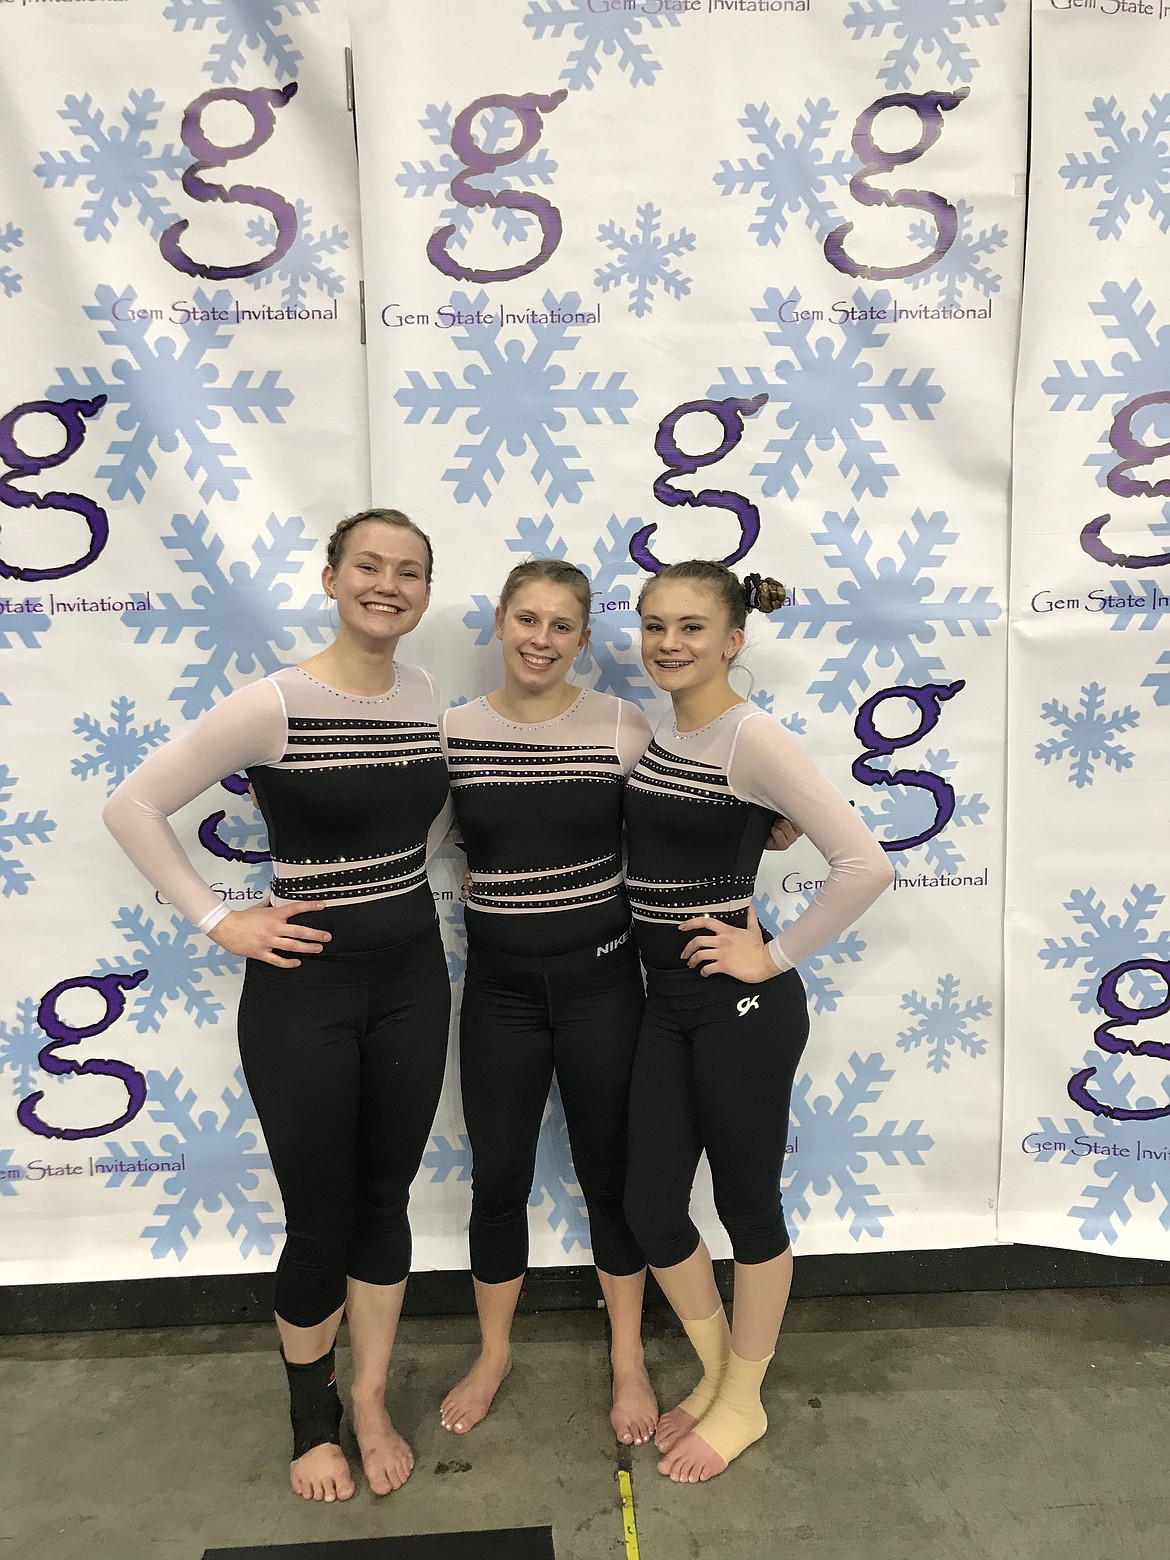 Courtesy photo
Avant Coeur Gymnastics Level 8s recently competed at the Gem State Invitational in Boise. From left are Emma Bayne, Lily Hollibaugh and Mauren Rouse.